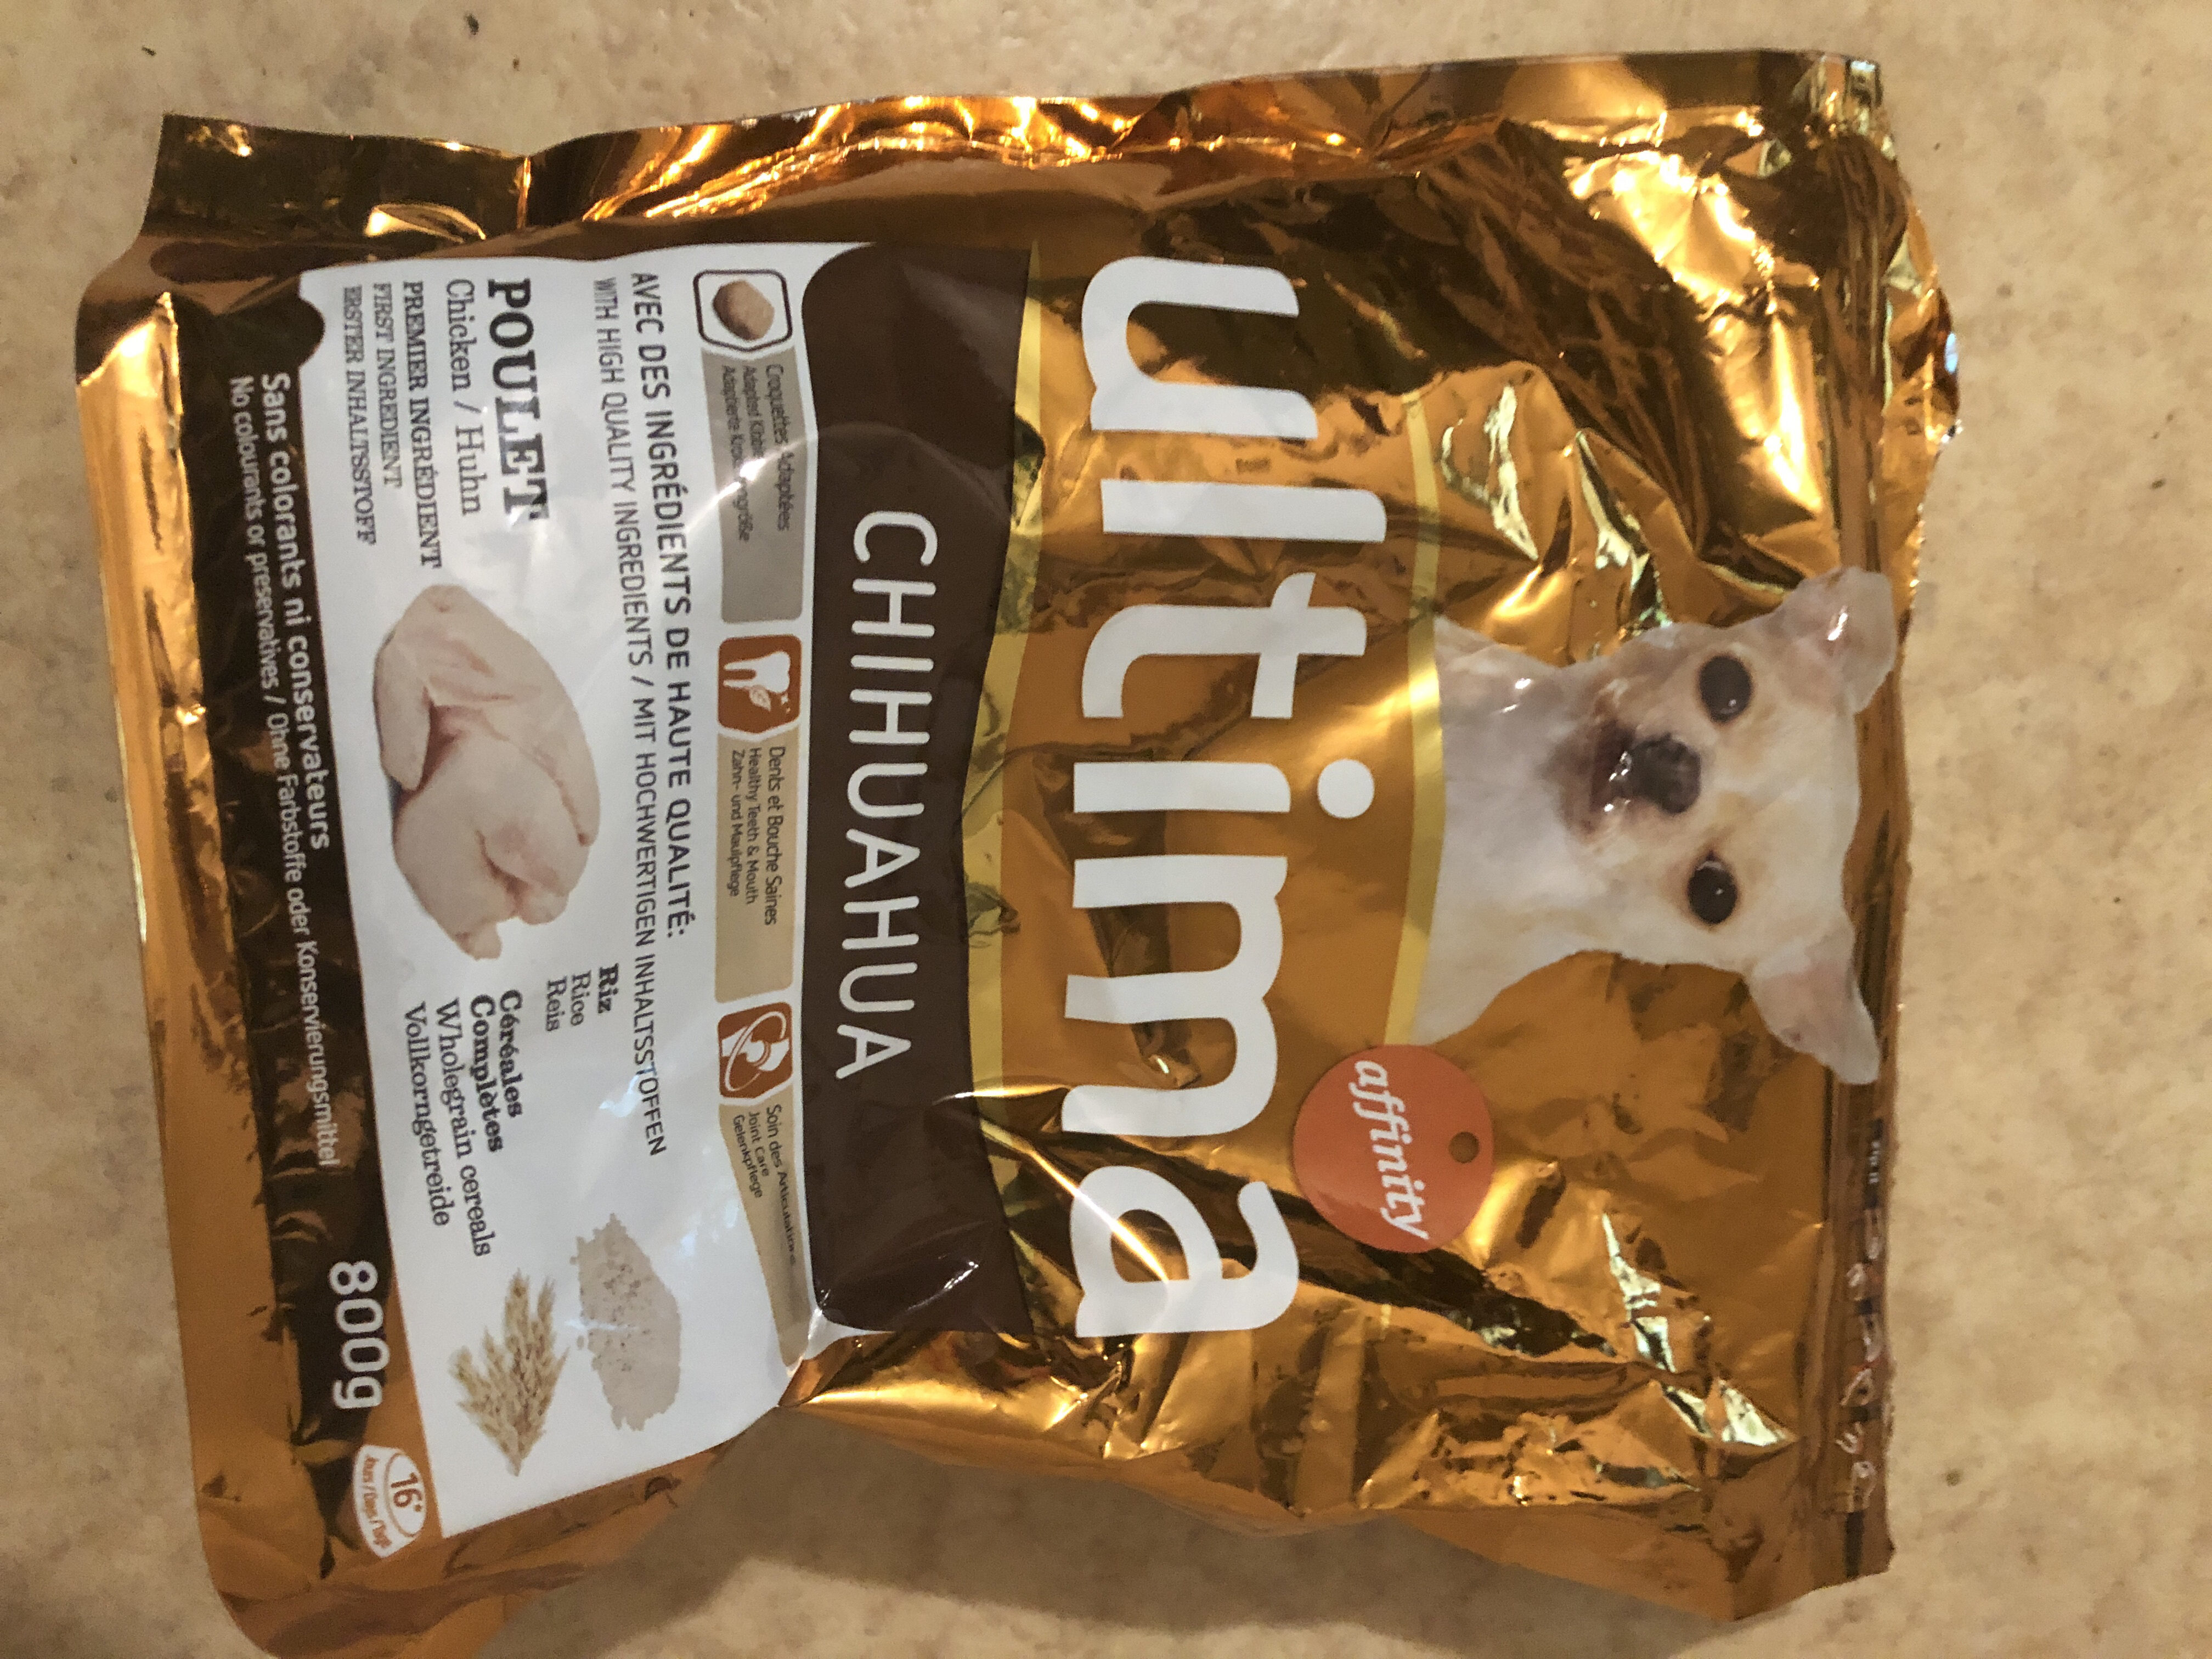 Affinity chihuahua - Product - fr